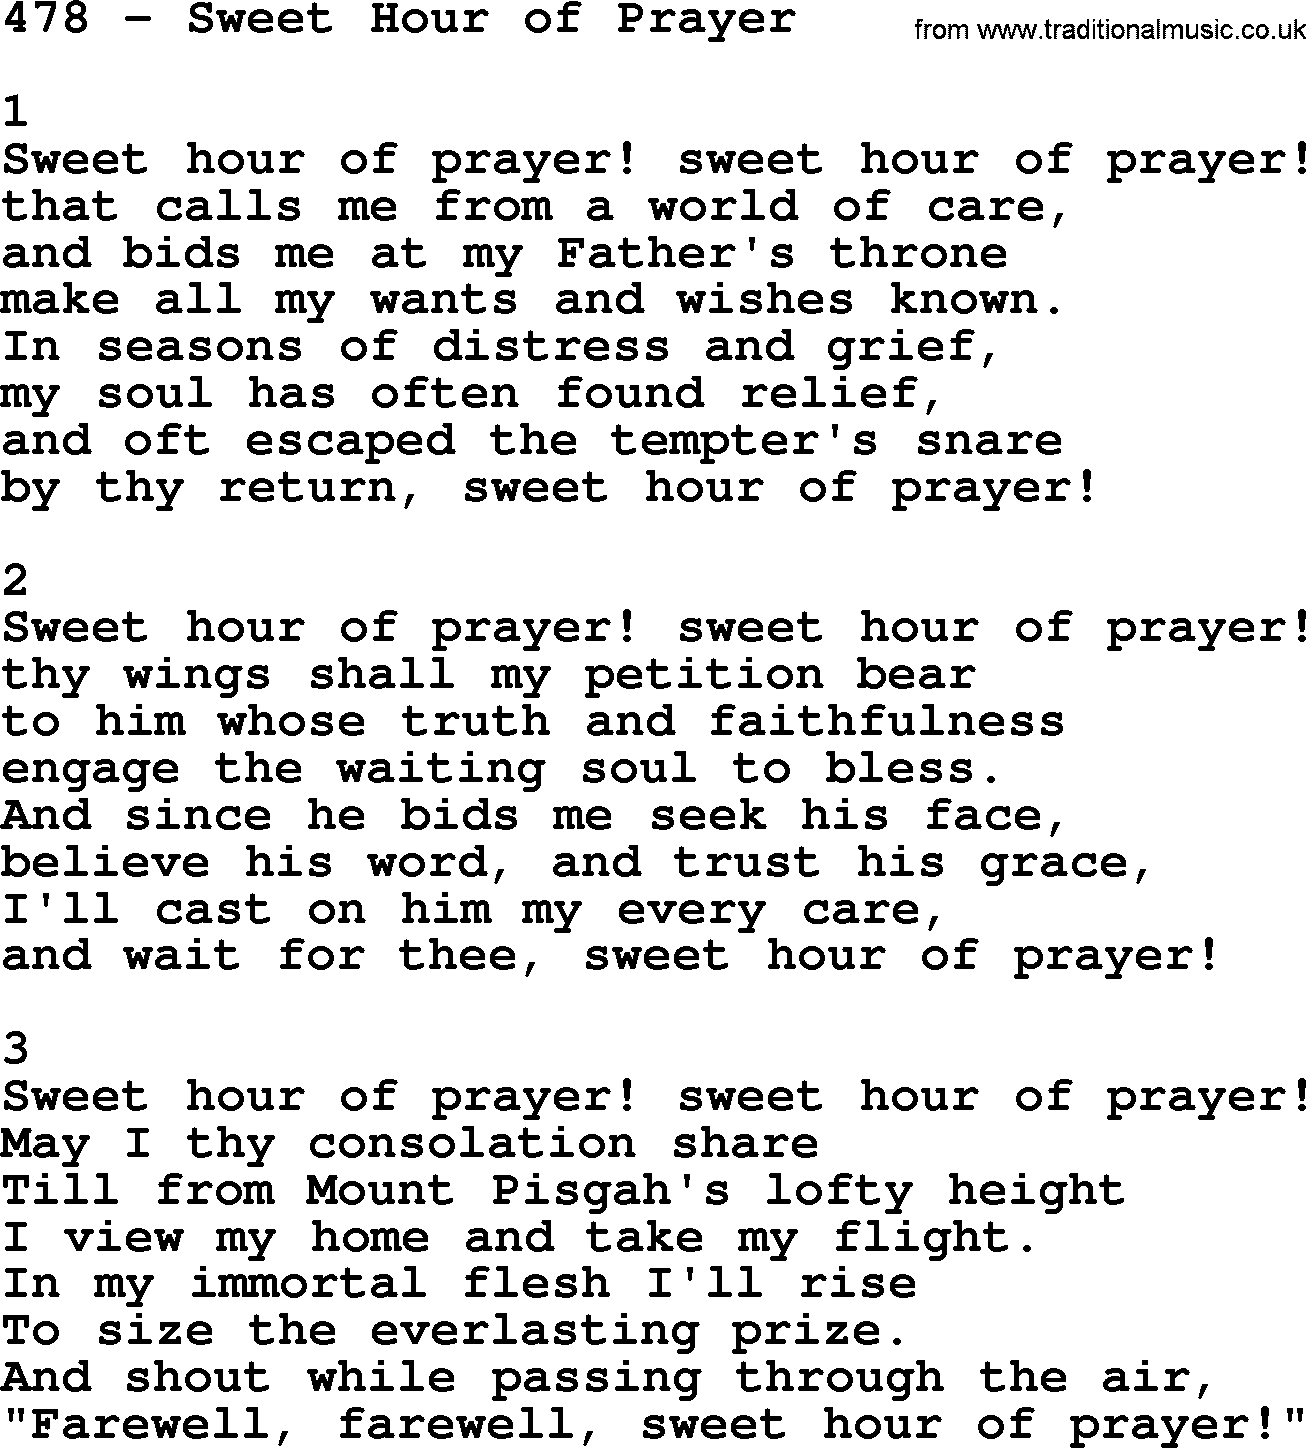 Complete Adventis Hymnal, title: 478-Sweet Hour Of Prayer, with lyrics, midi, mp3, powerpoints(PPT) and PDF,